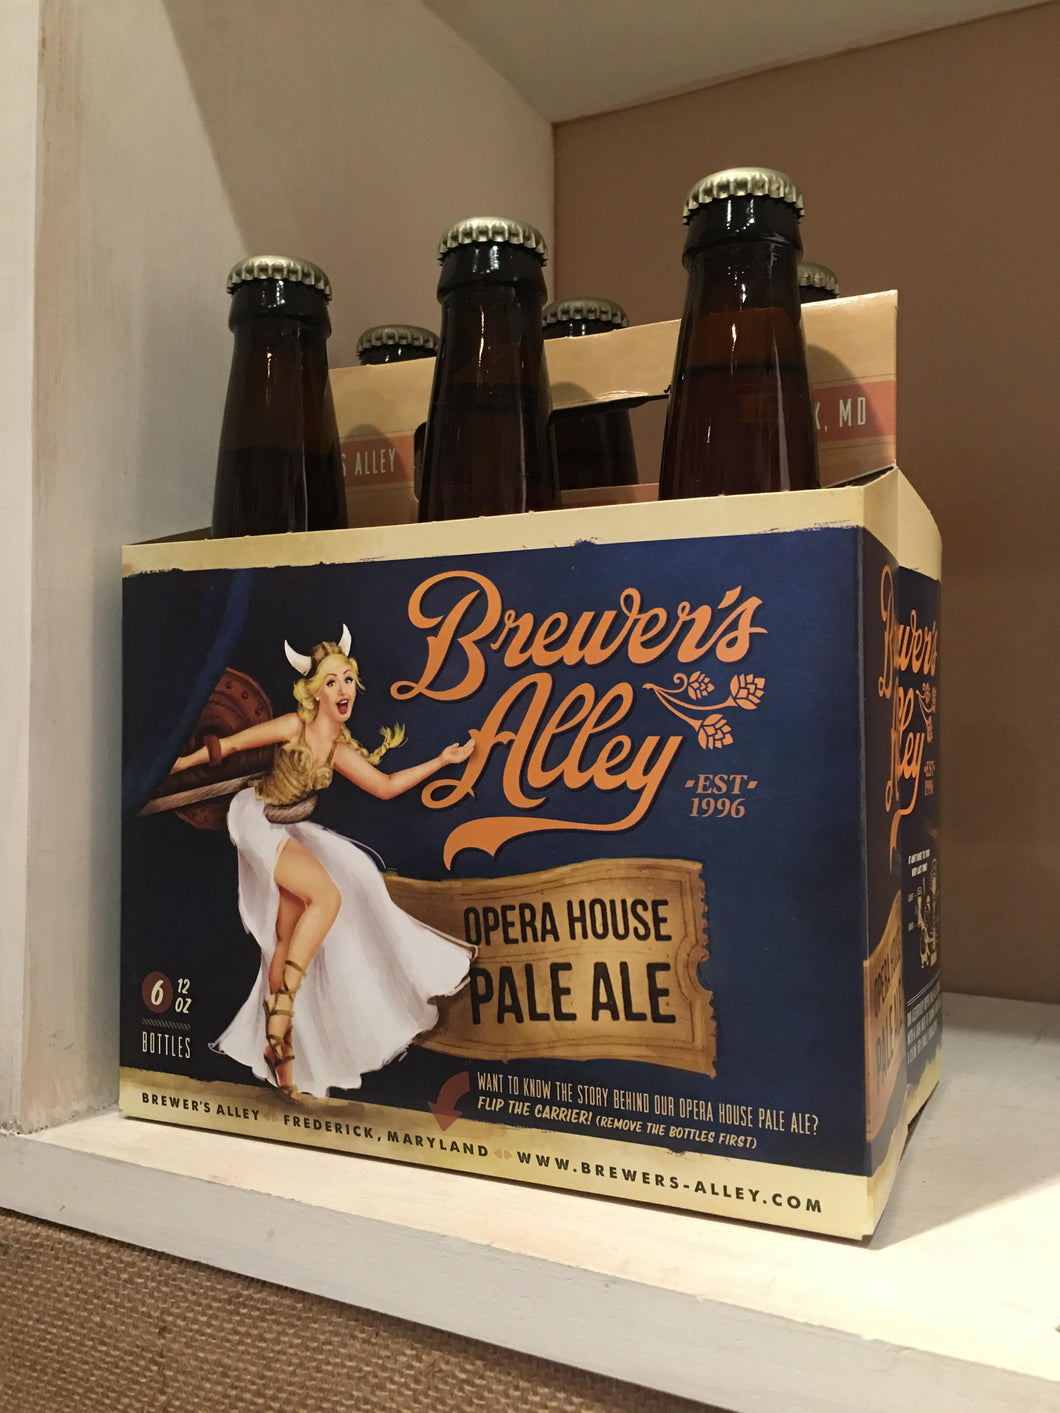 Brewer's Alley Opera House Pale Ale